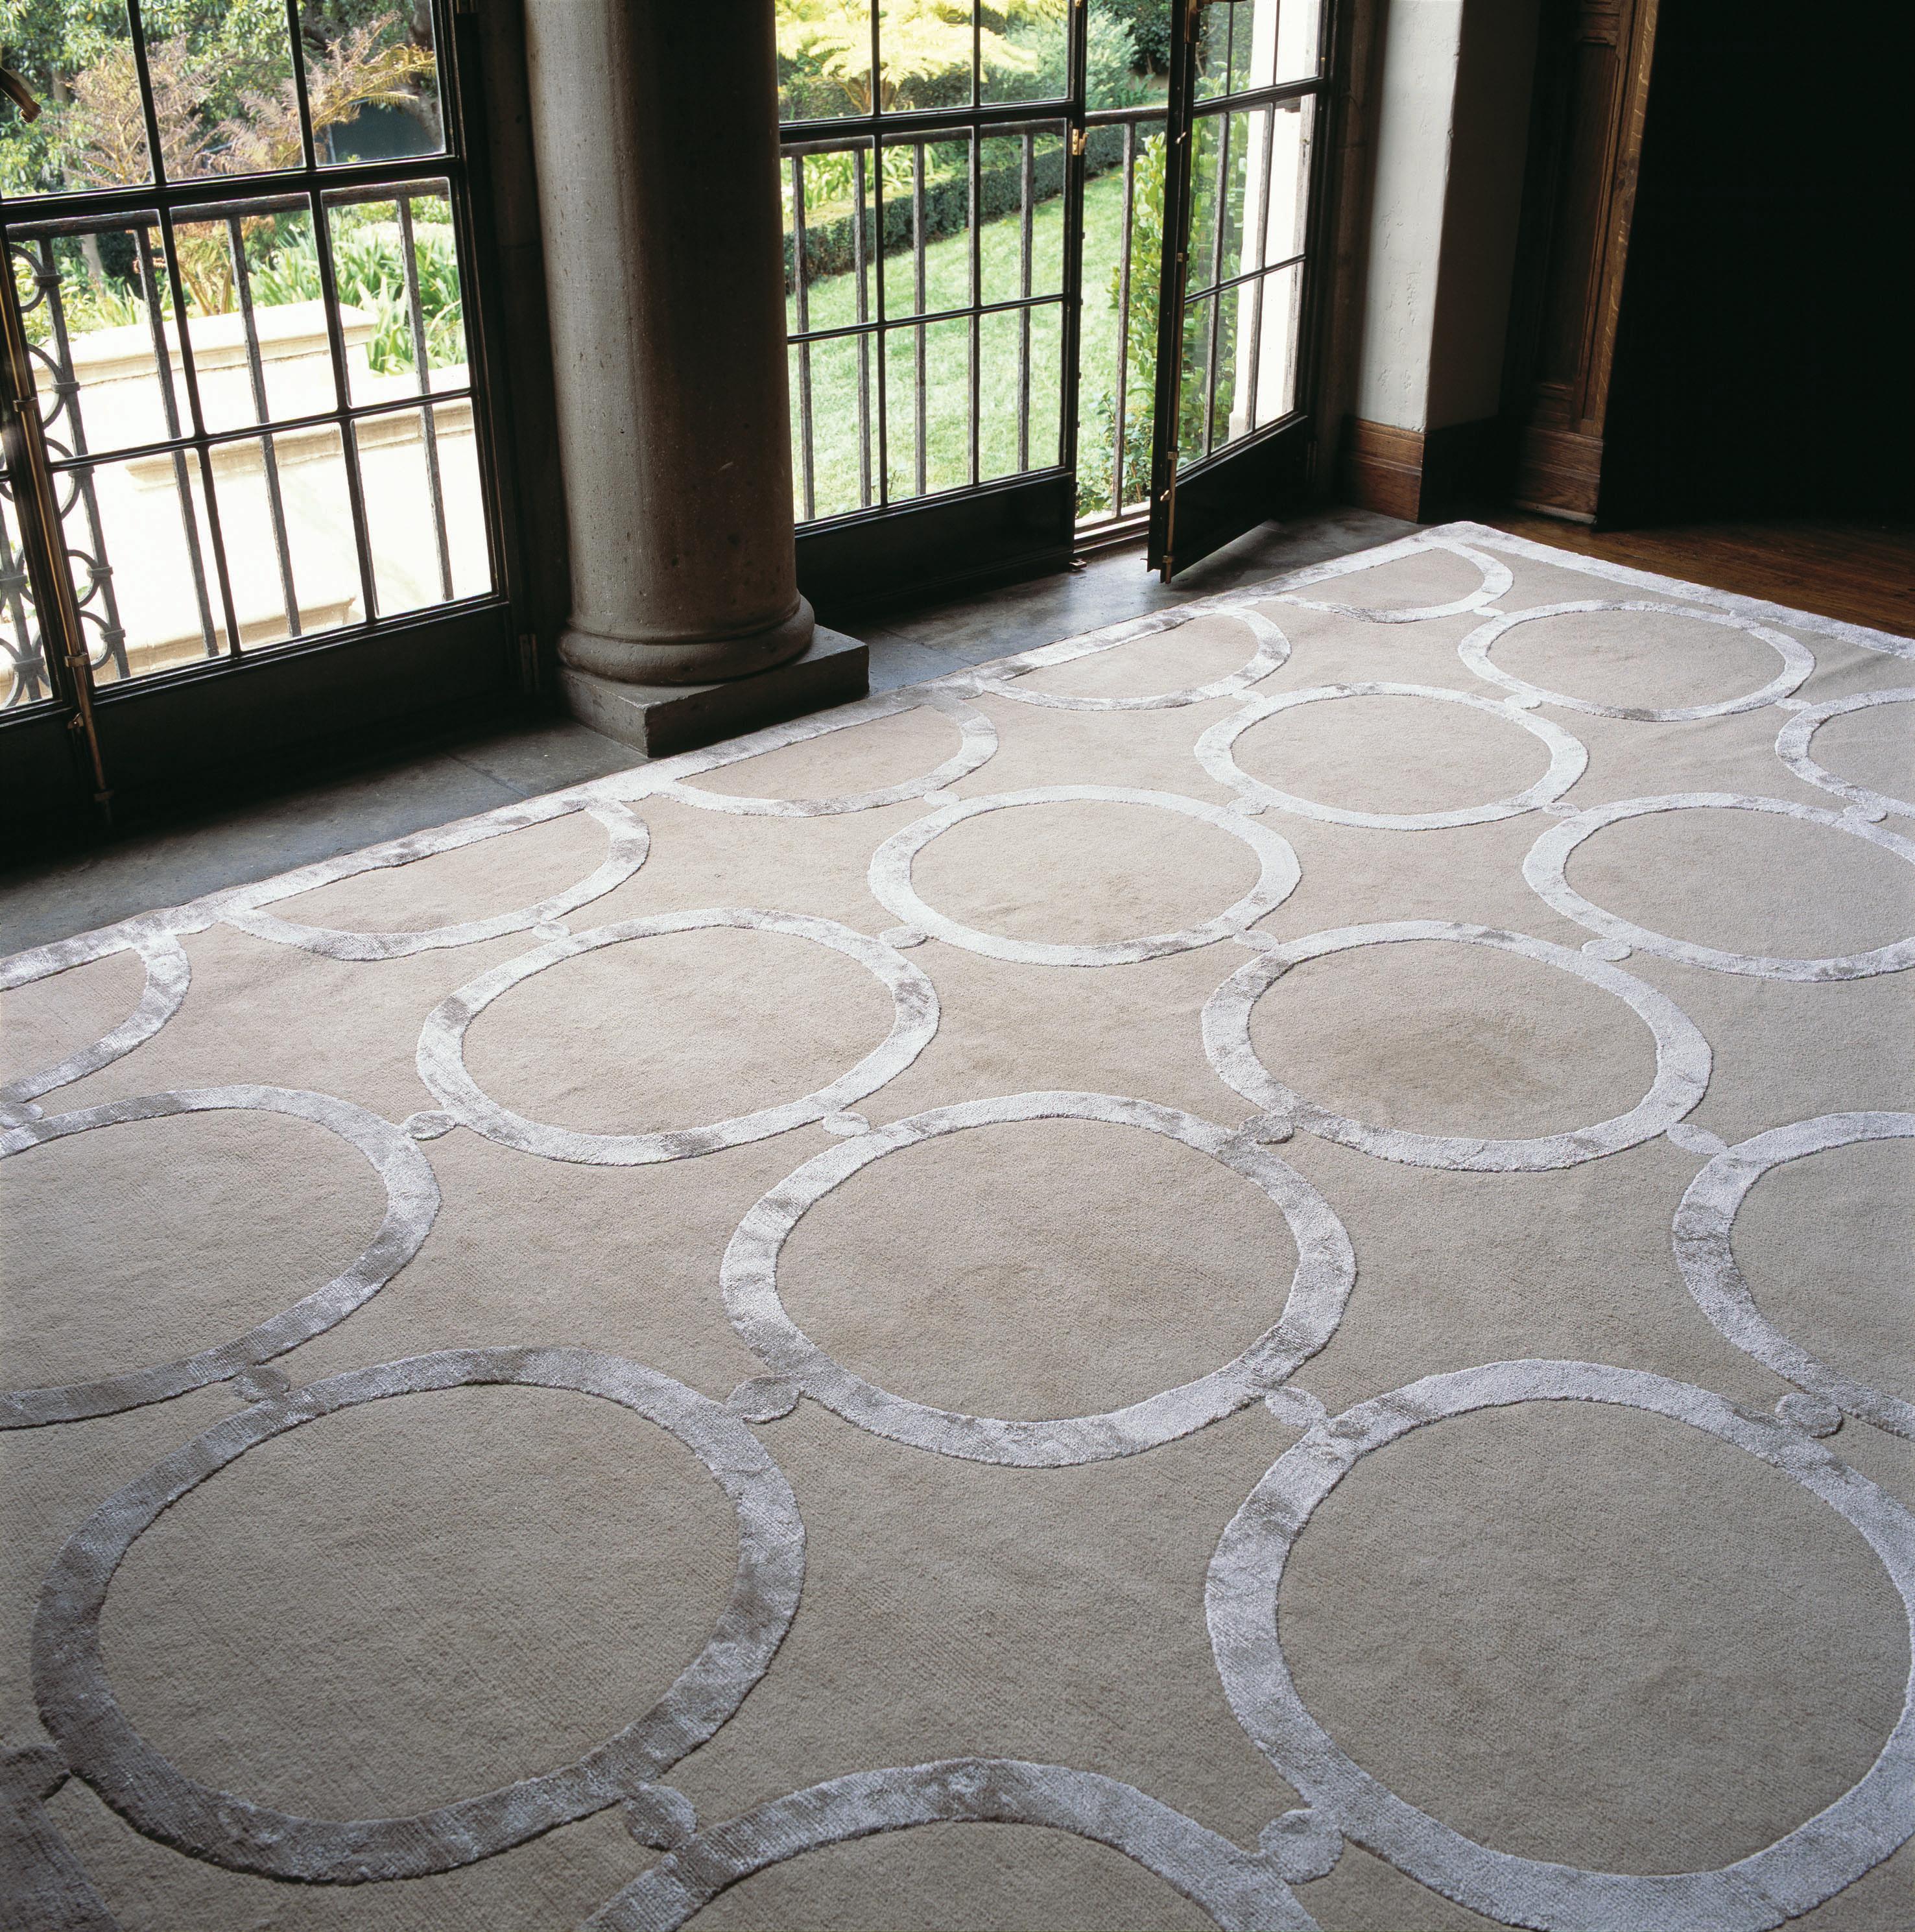 The Catella rug is a classical design, strict and sophisticated. It adds glamour to any room. Emily Todhunter. This is something of an understatement, as Catella has been The Rug Company's most successful design of recent years. It has a color